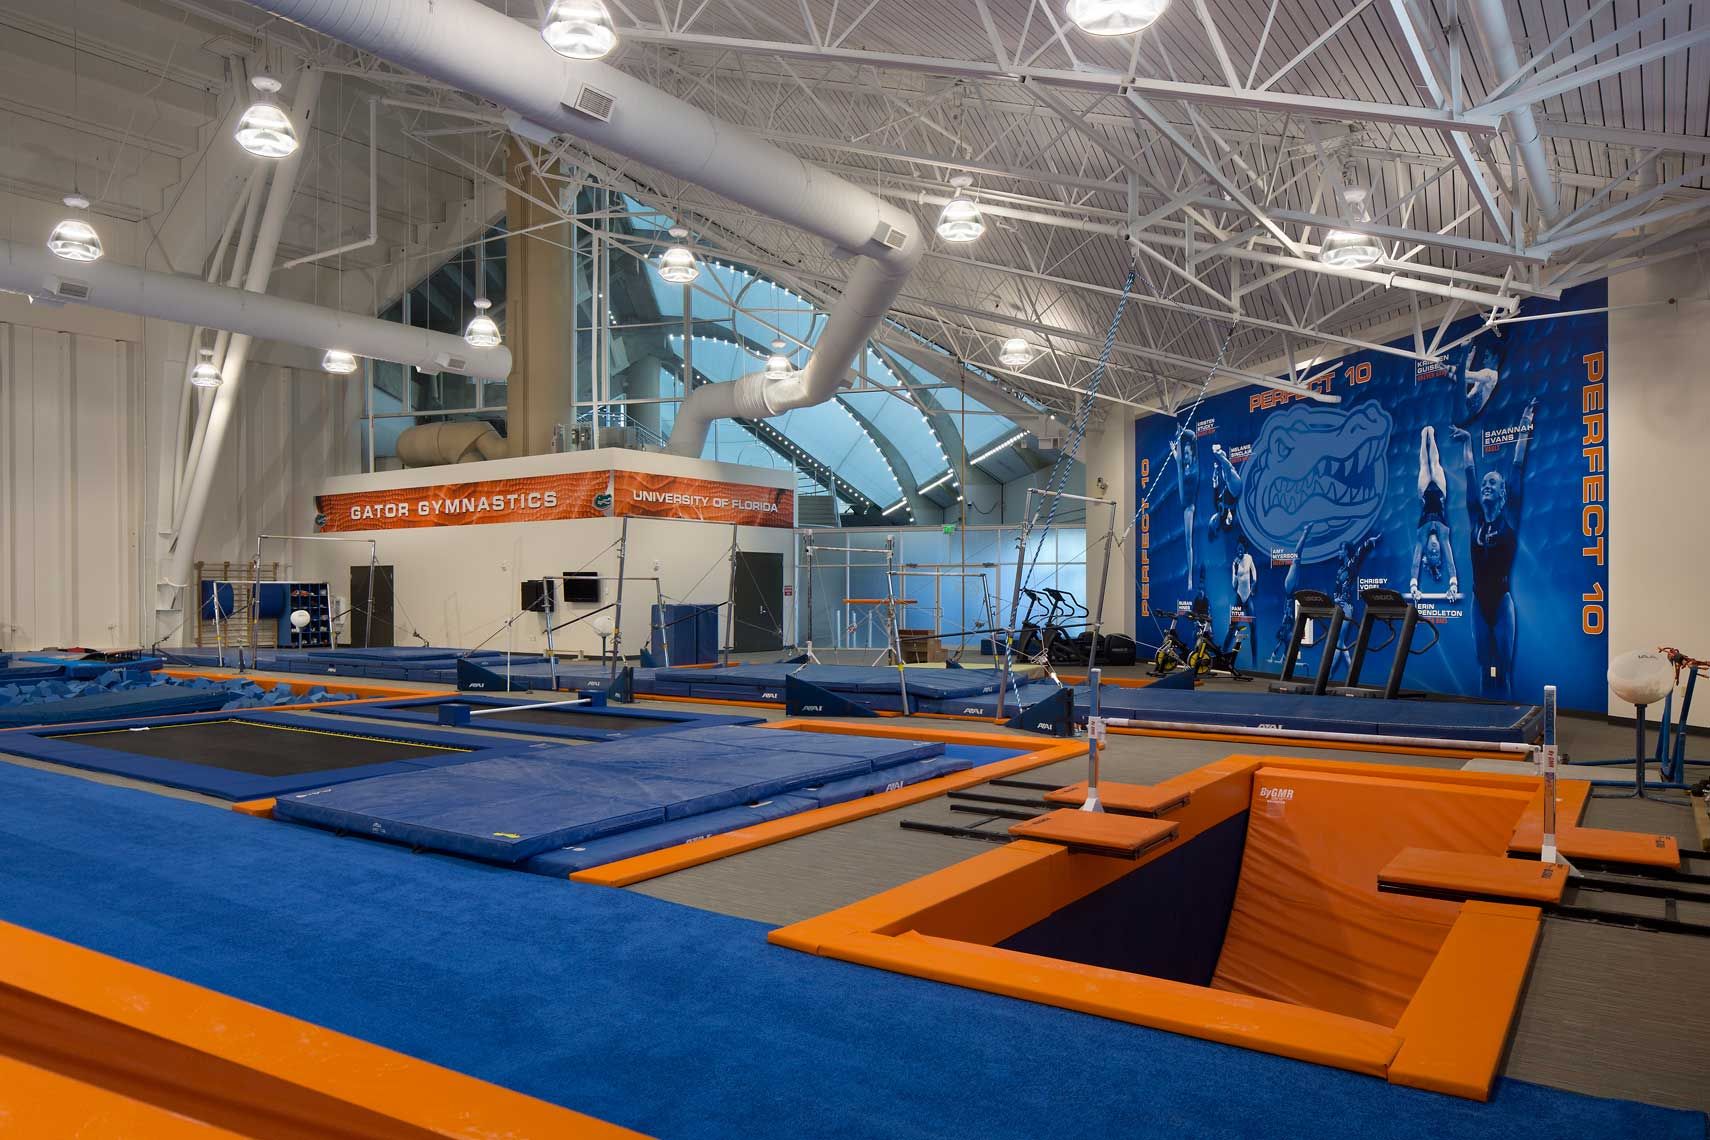 Detailed interior view of venue with equipment at the University of Florida Gymnastics Facility